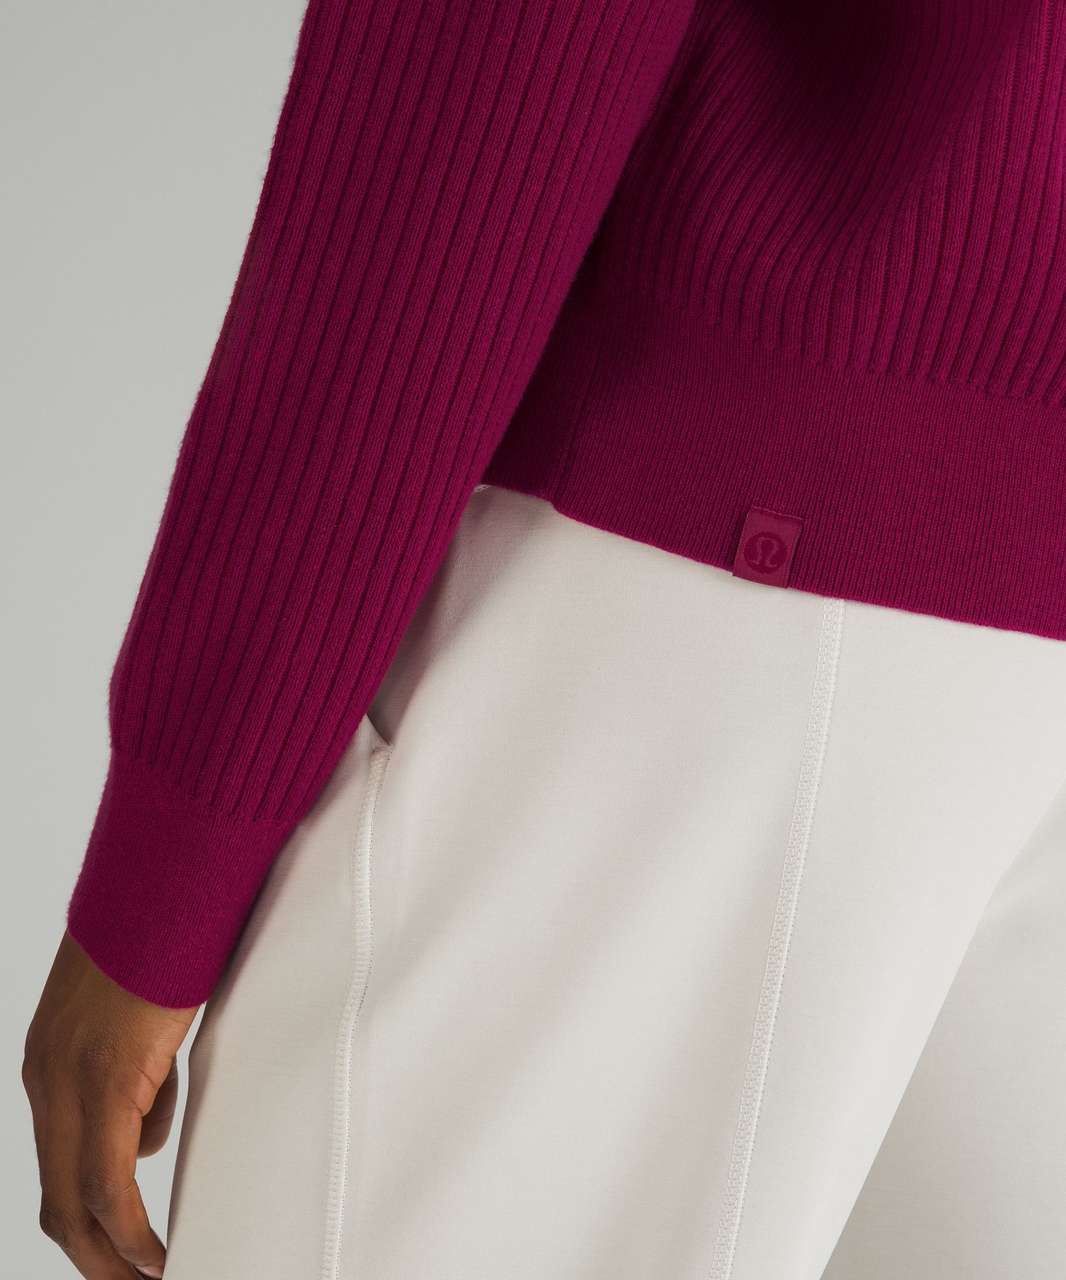 Cotton-Blend Ribbed Sweater